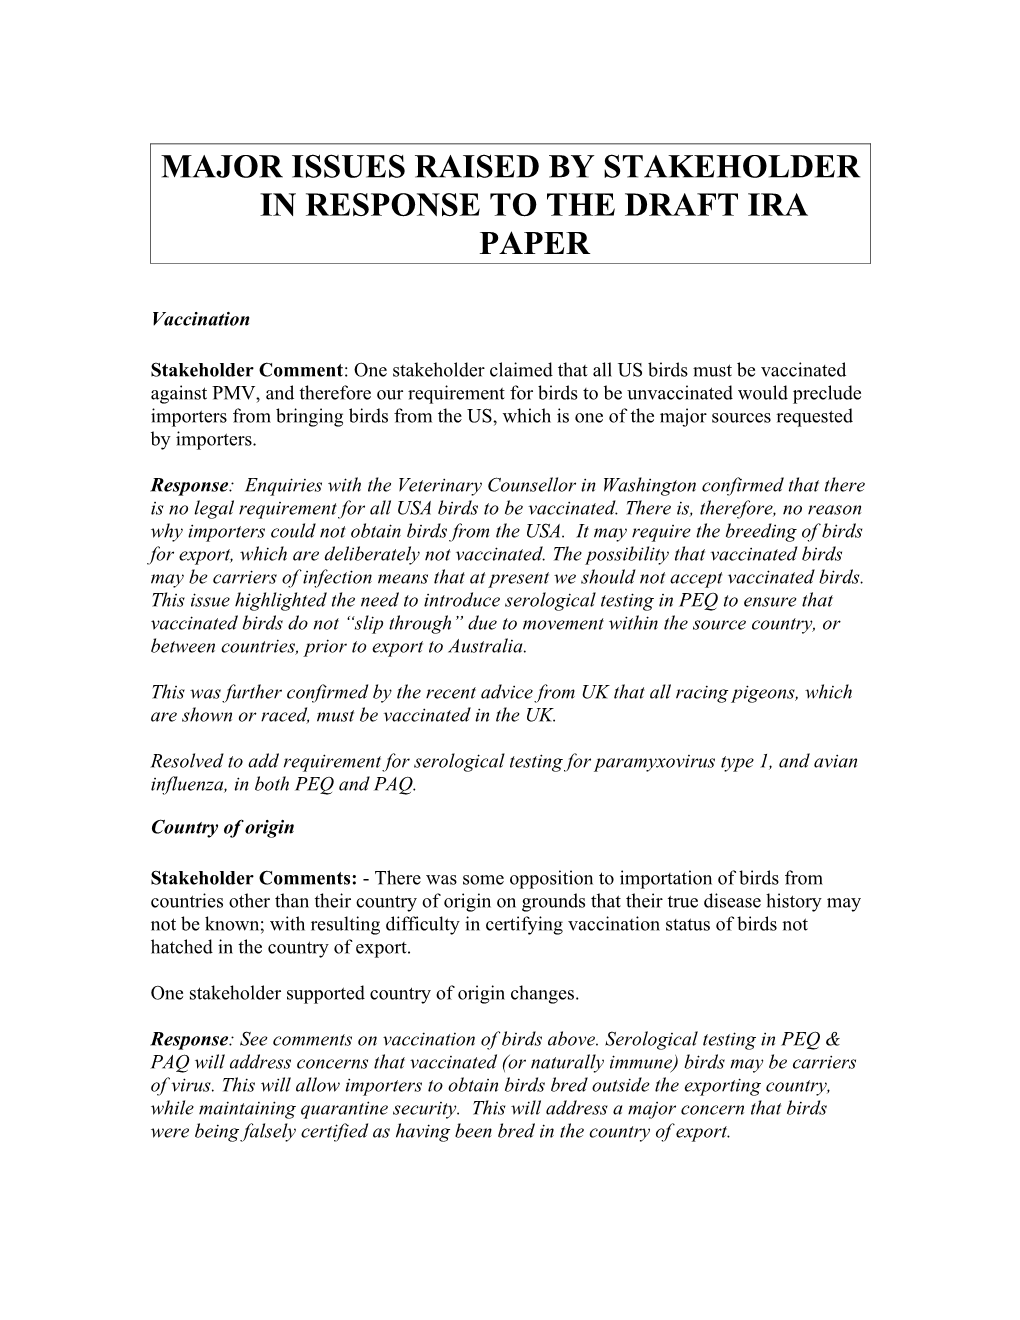 MAJOR ISSUES RAISED by STAKEHOLDER in RESPONSE to the DRAFT Ira PAPER